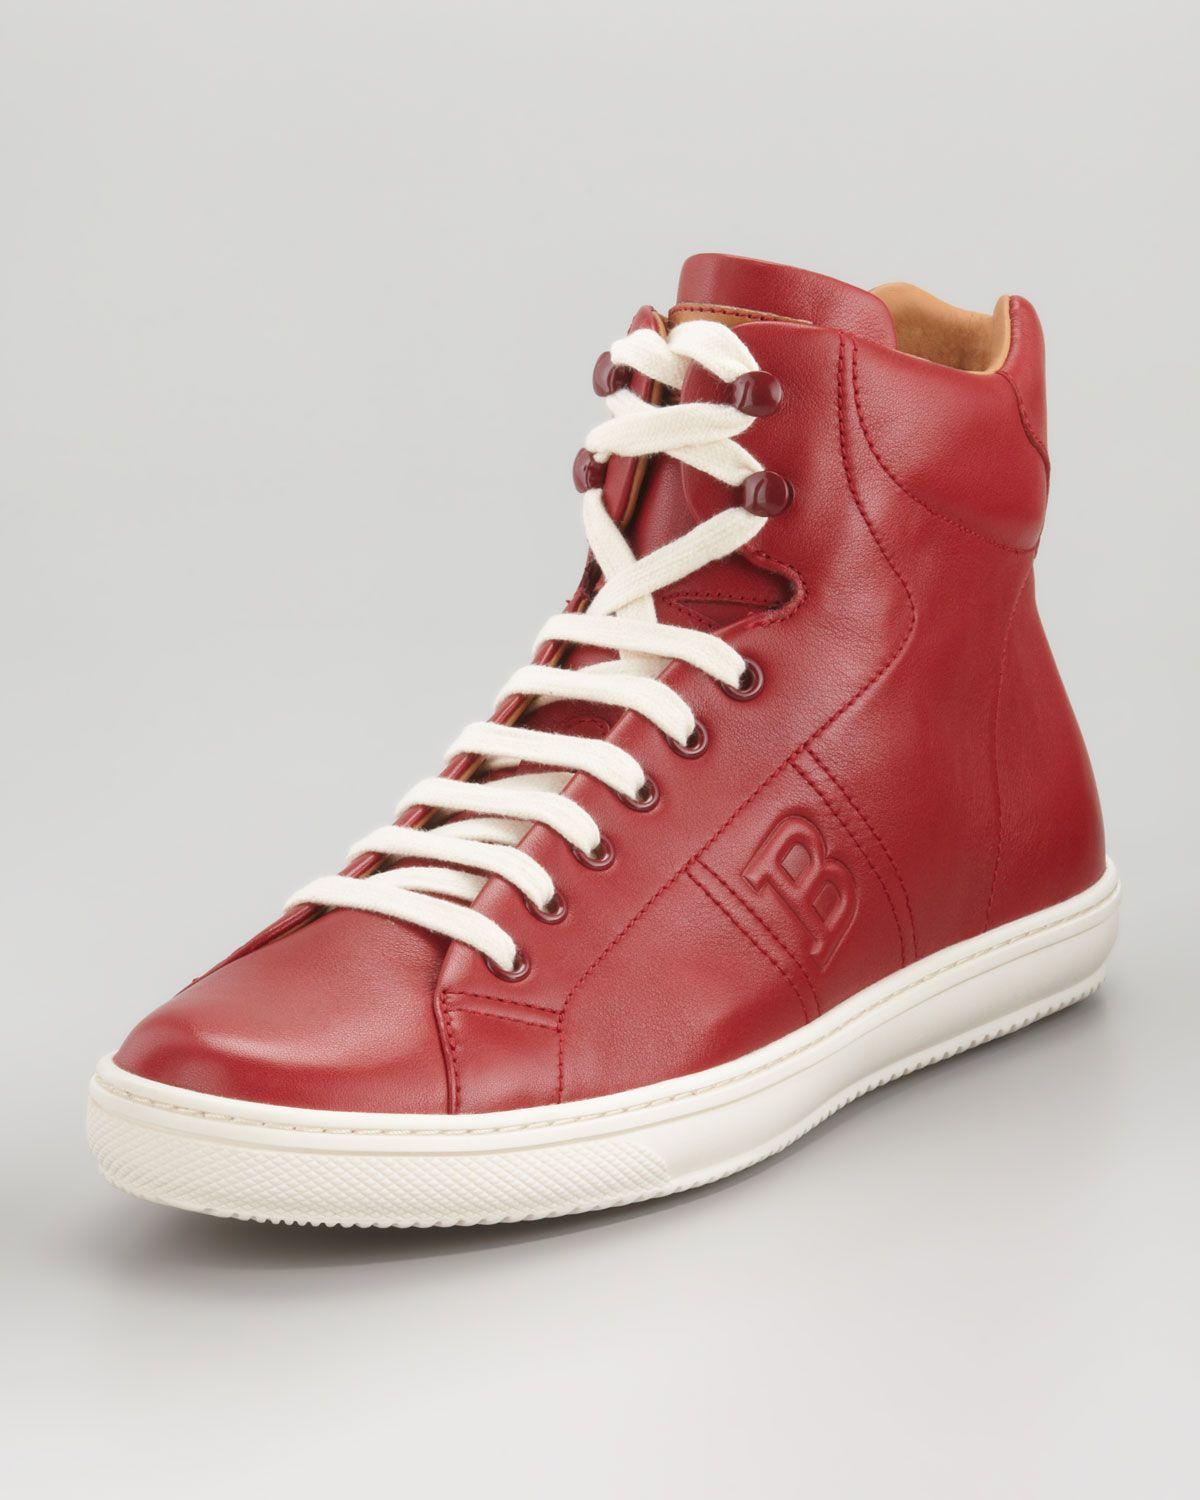 Bally Shoes Logo - Lyst - Bally Oxen Logo embossed High top Sneaker in Red for Men